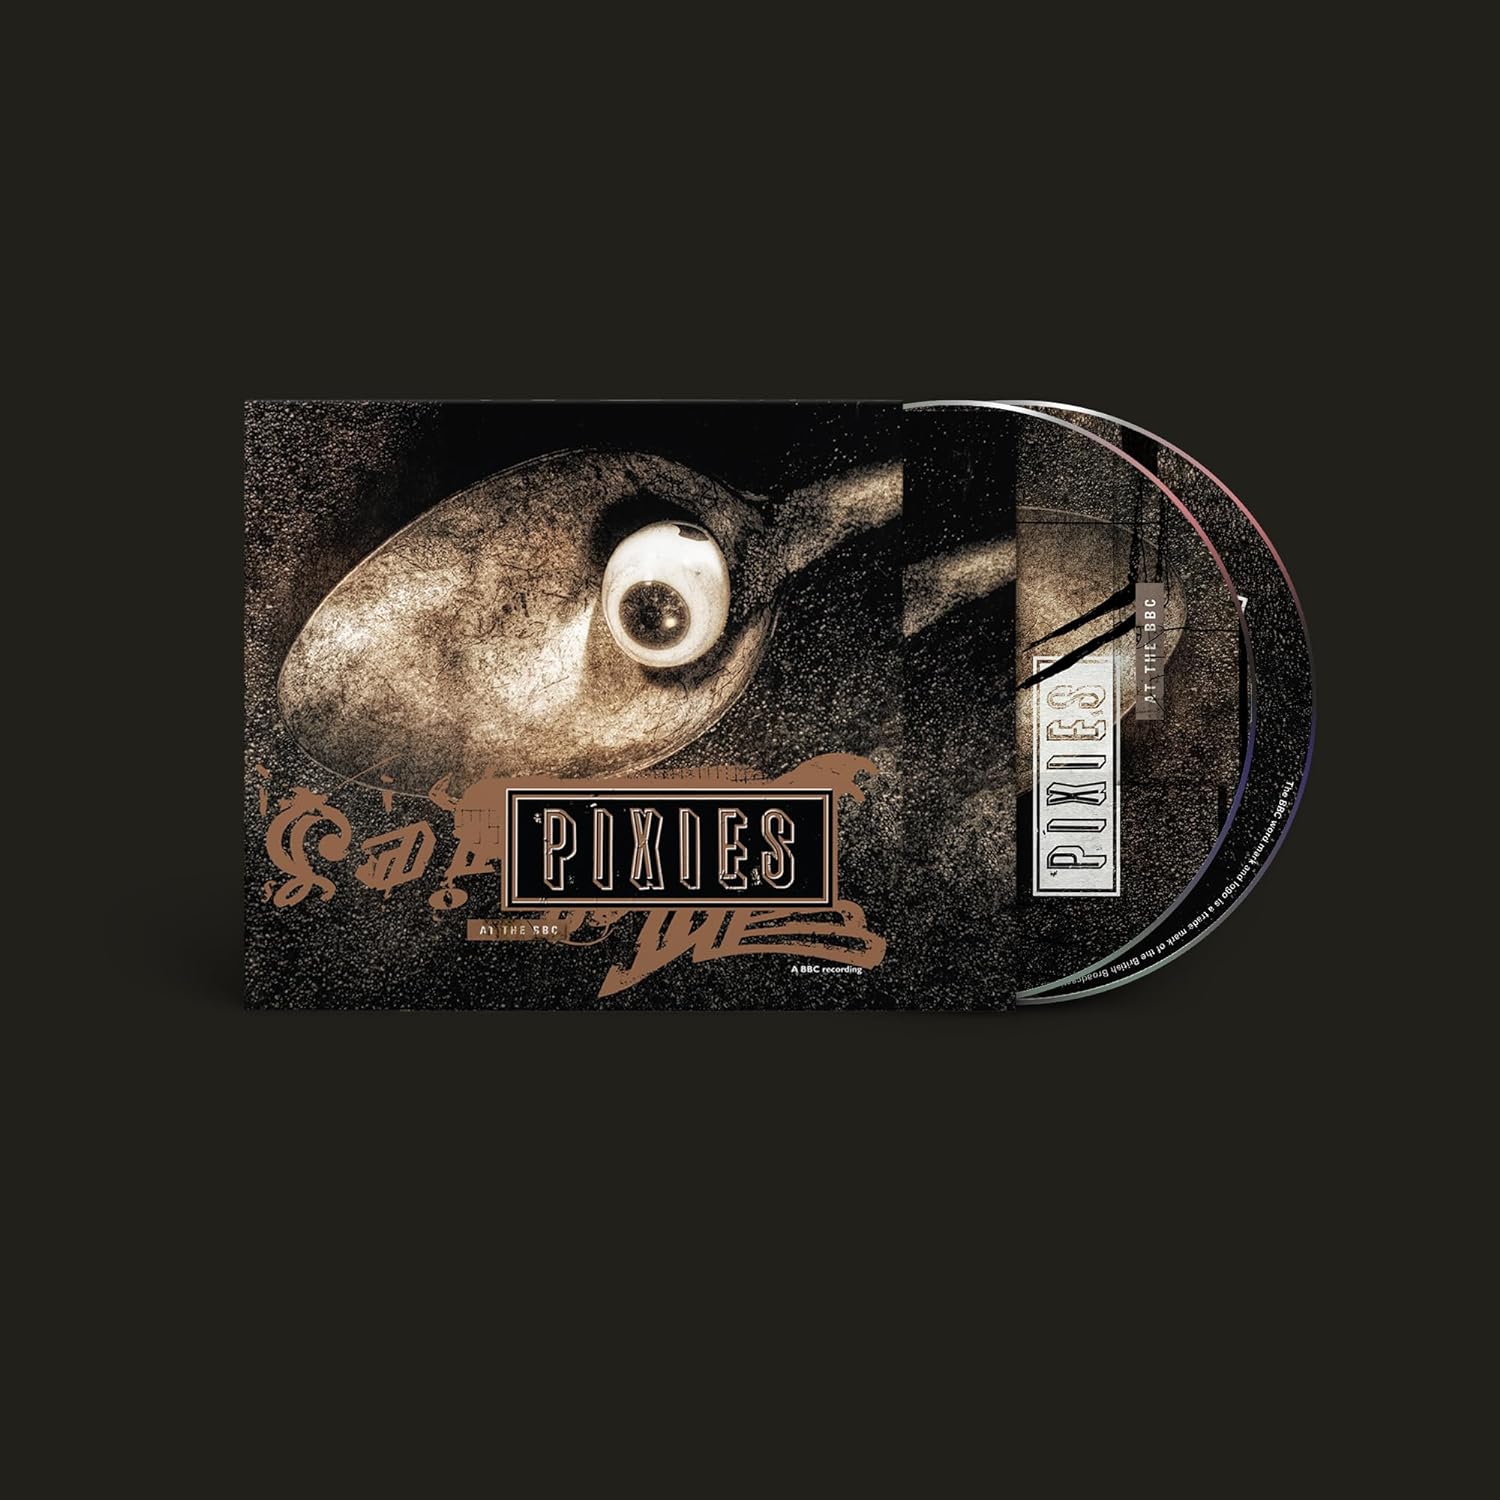 PIXIES – LIVE AT THE BBC CD2